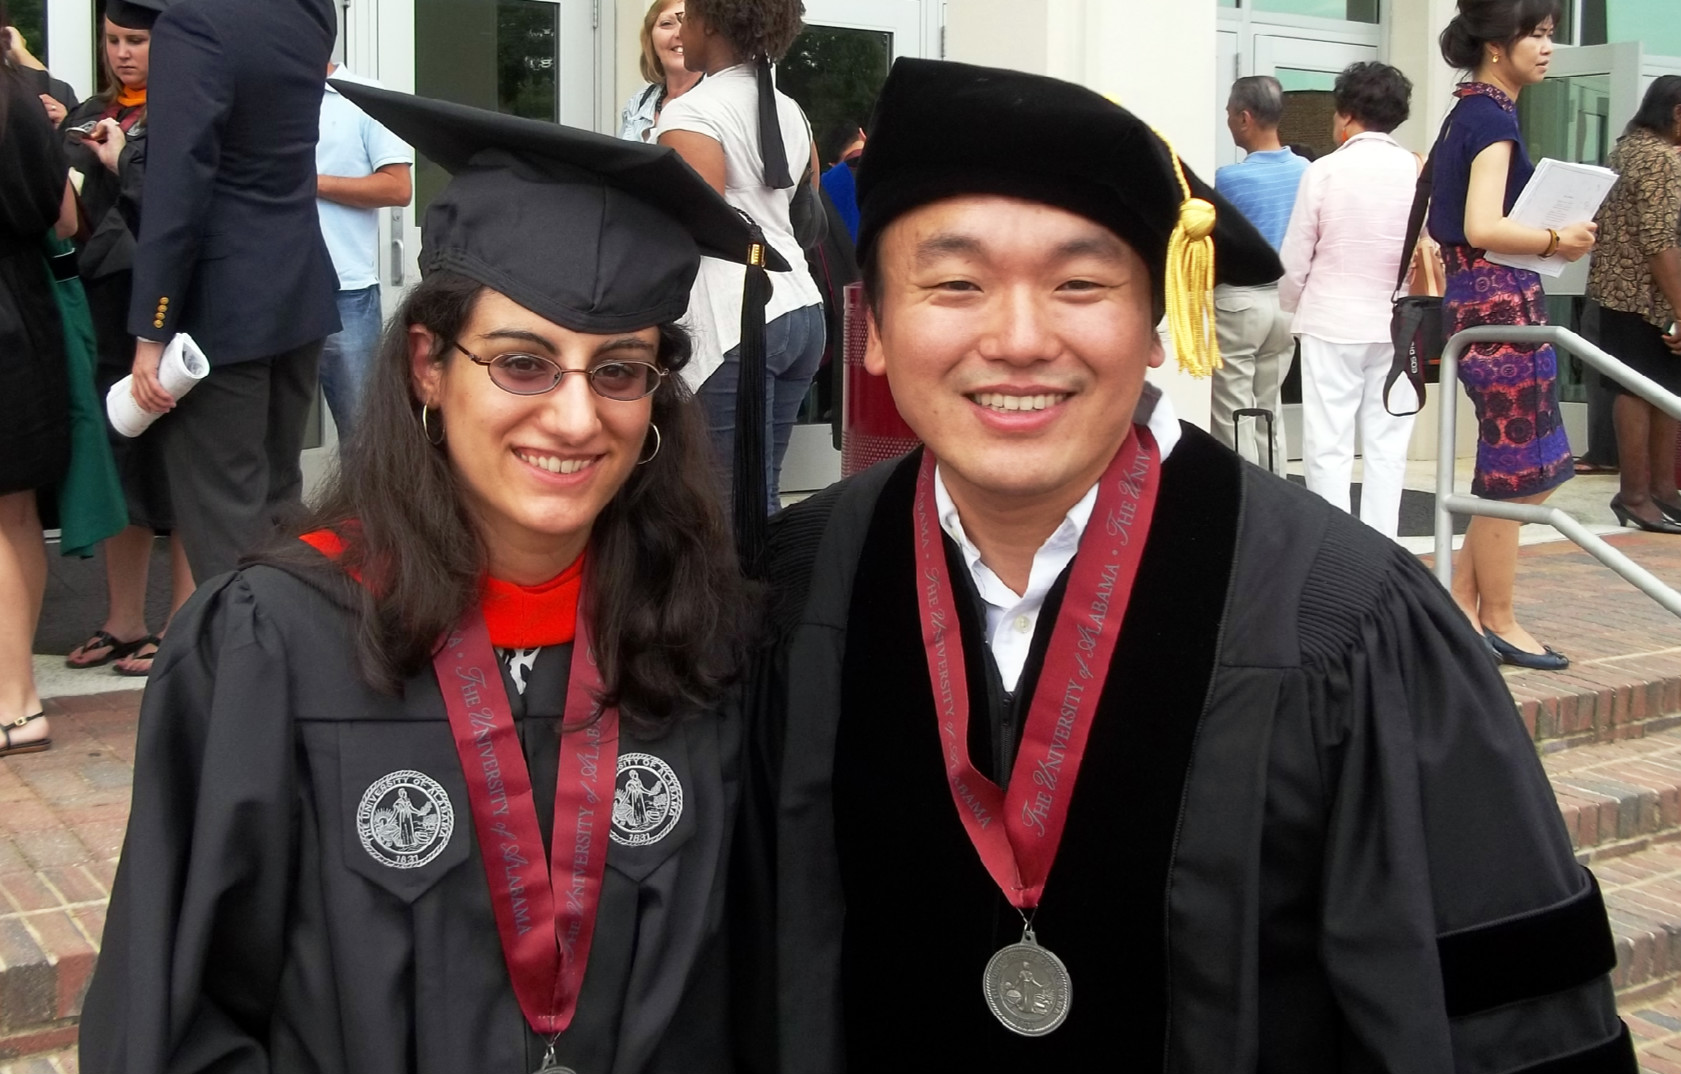 Female student with black graduation gown and cap standing next to a male professor in academic regalia